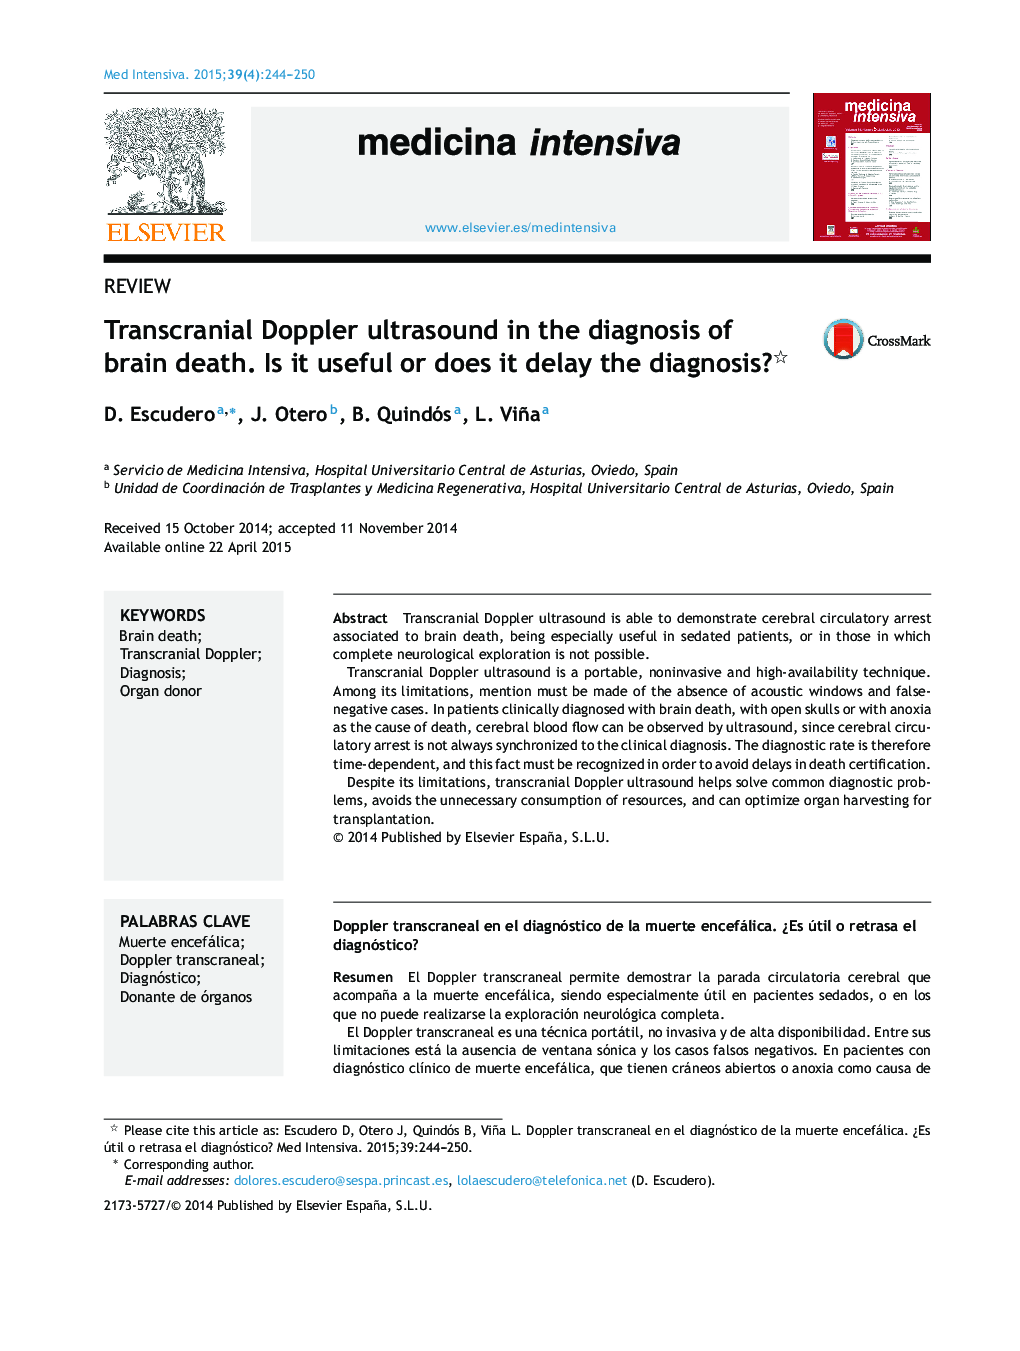 Transcranial Doppler ultrasound in the diagnosis of brain death. Is it useful or does it delay the diagnosis? 